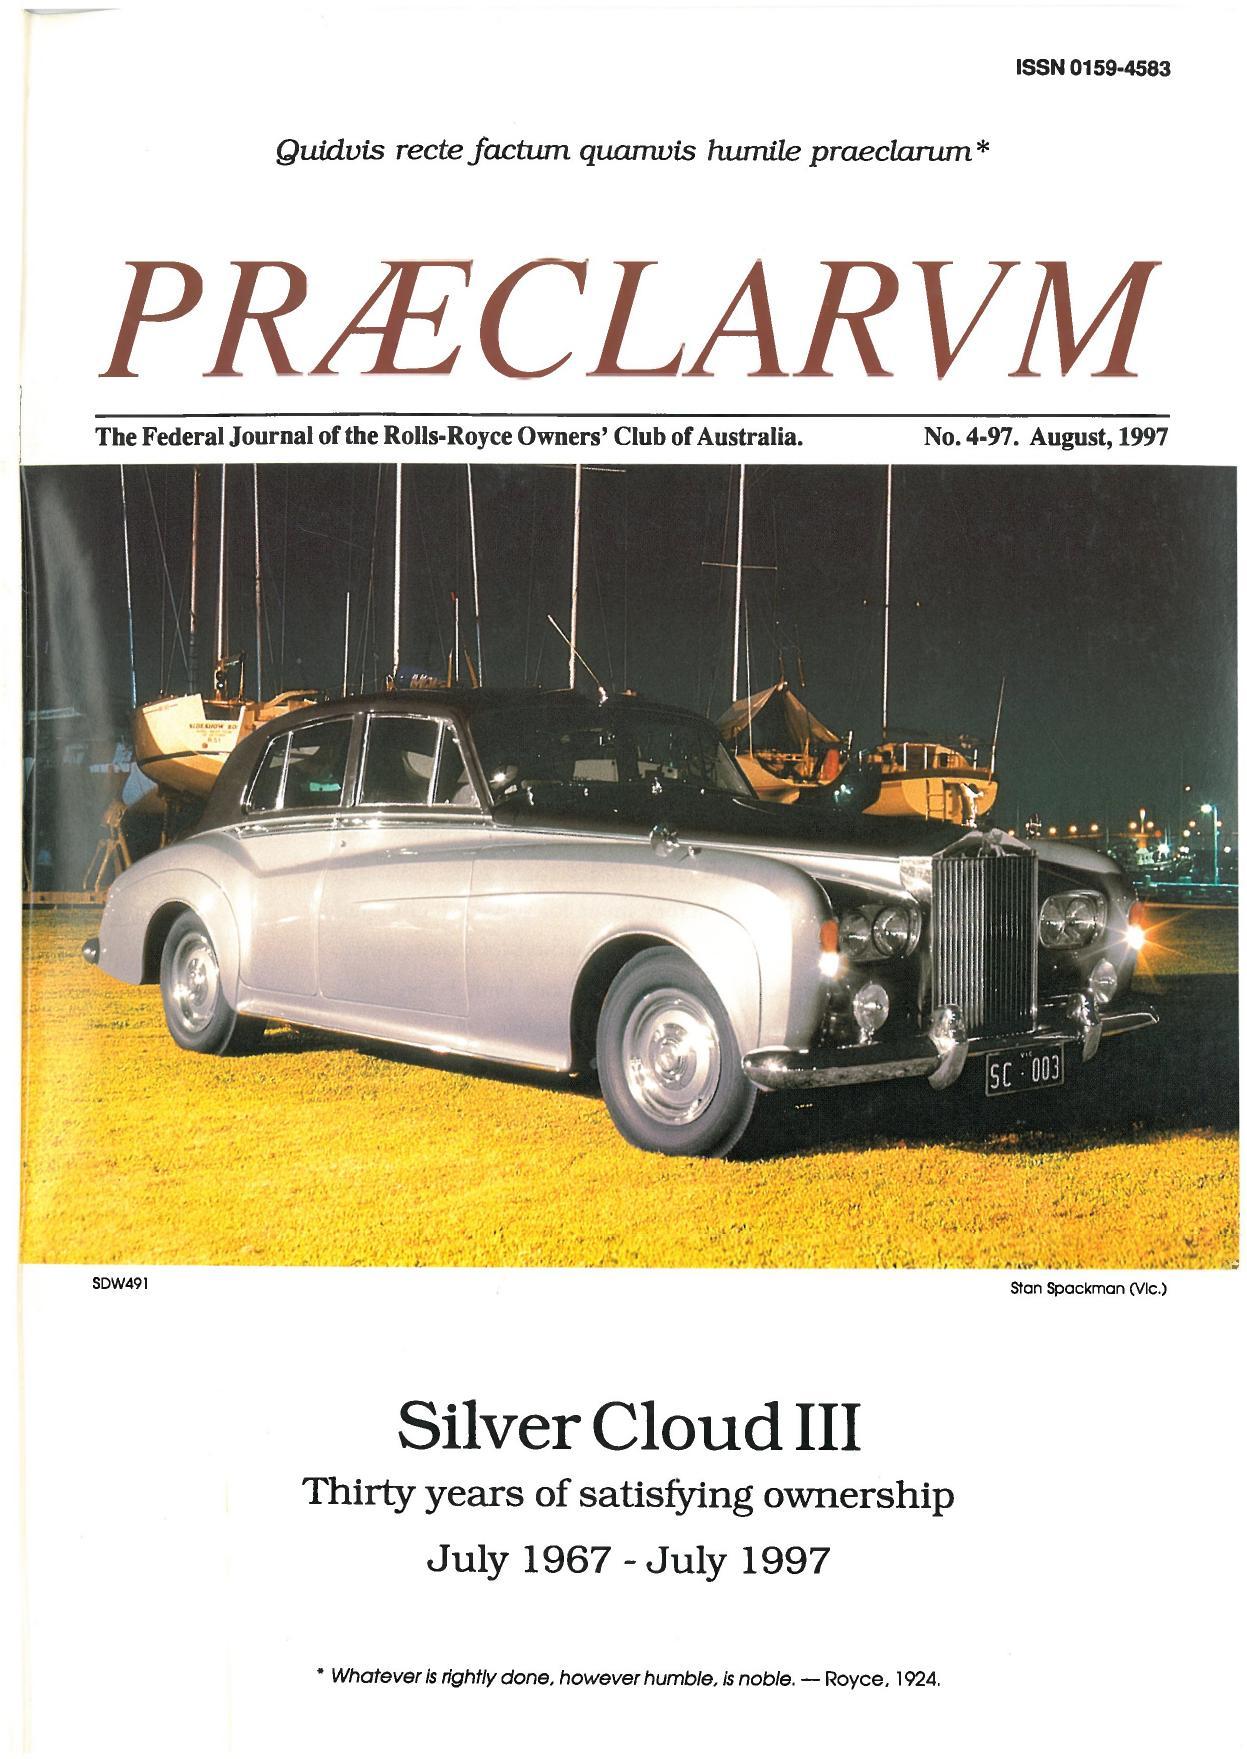 preclarvm-the-federal-journal-of-the-rolls-royce-owners-club-of-australia-august-1997.pdf